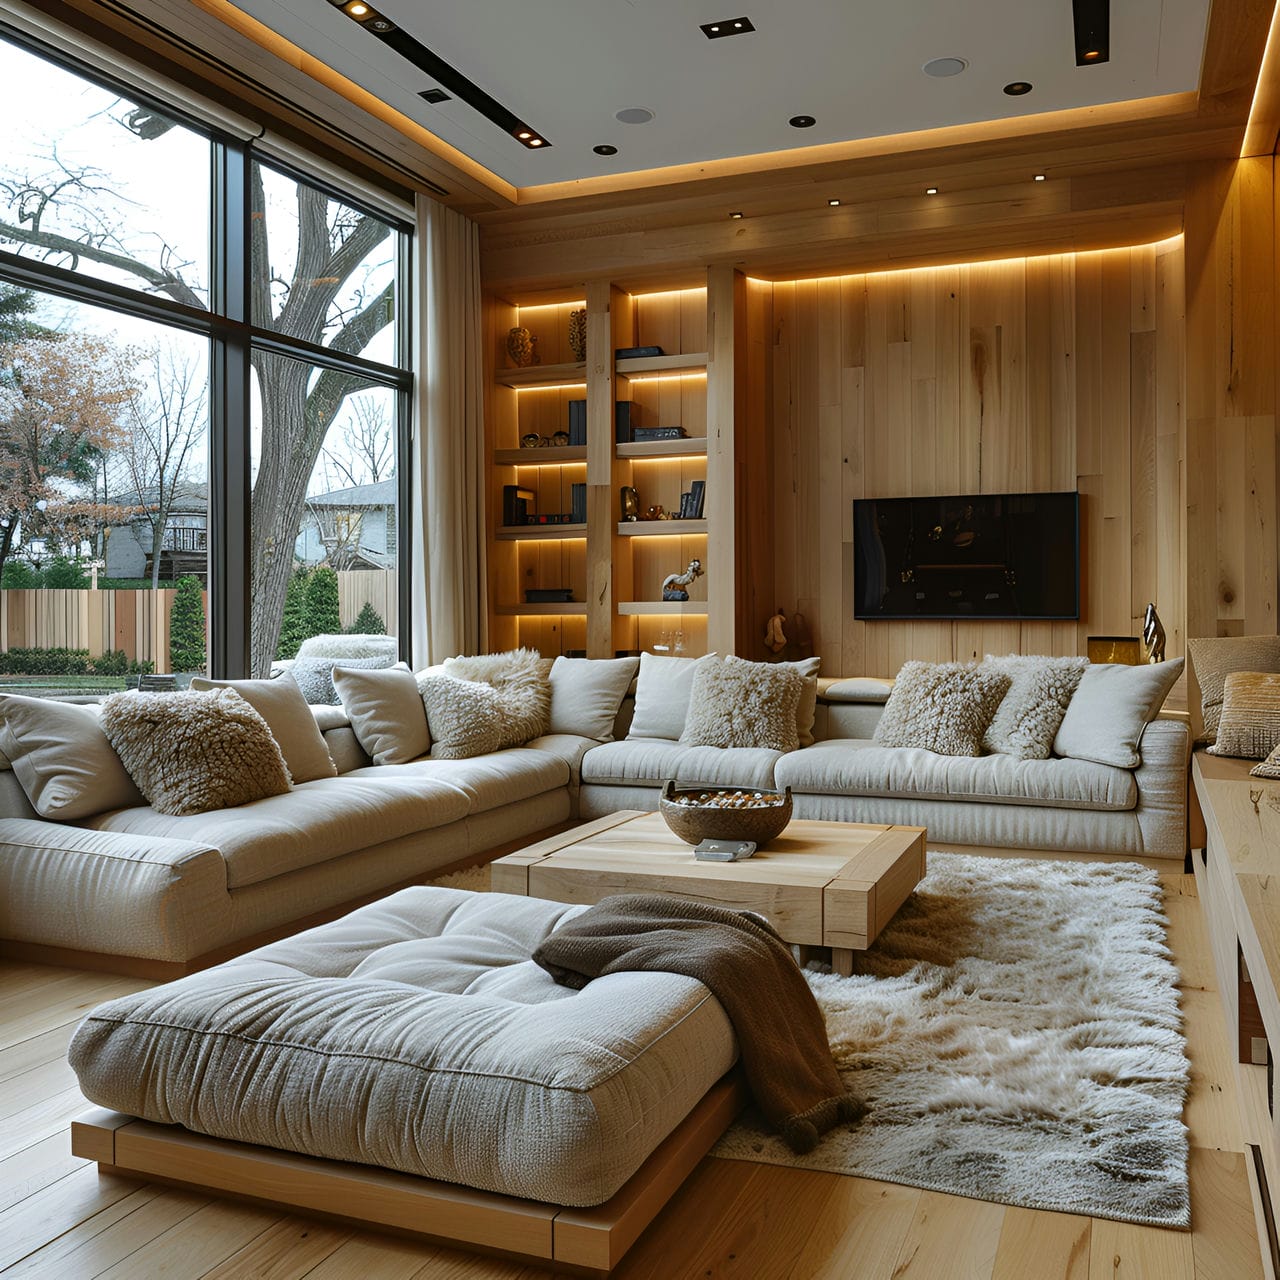 Family room: size, functionality, uses, furniture and renovation